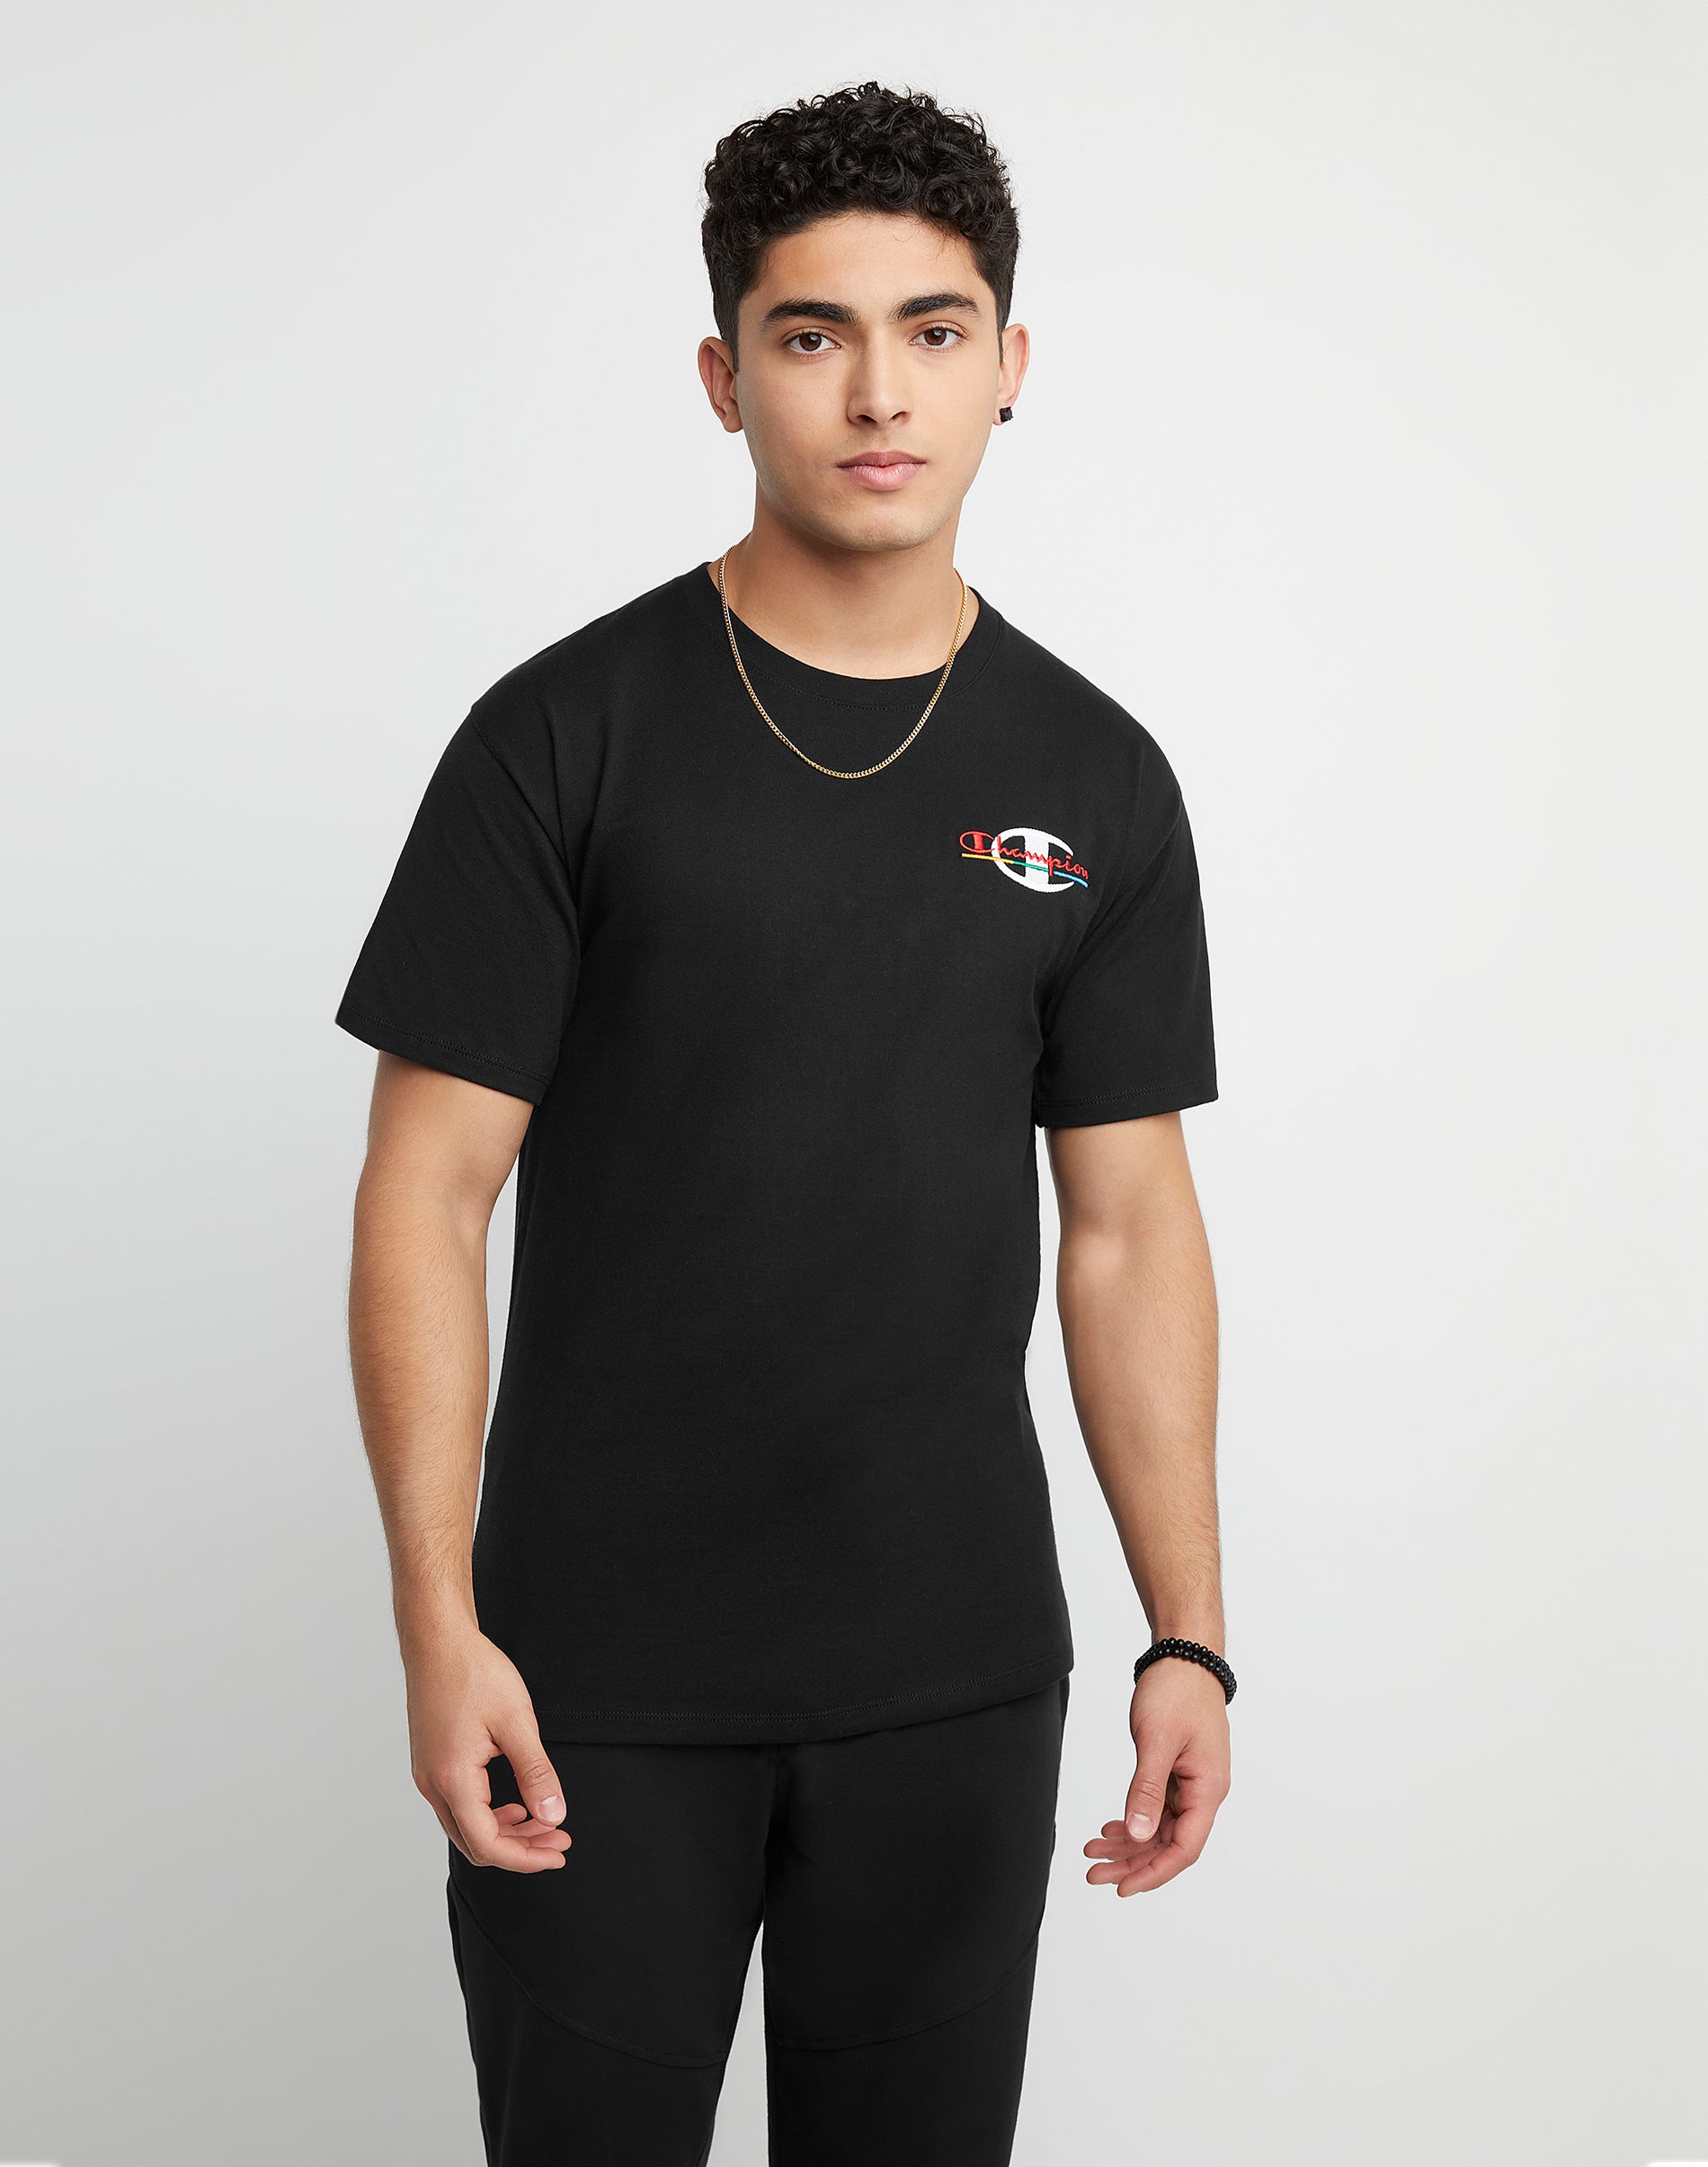 Men's Classic Muscle T-Shirt, Embroidered C Logo